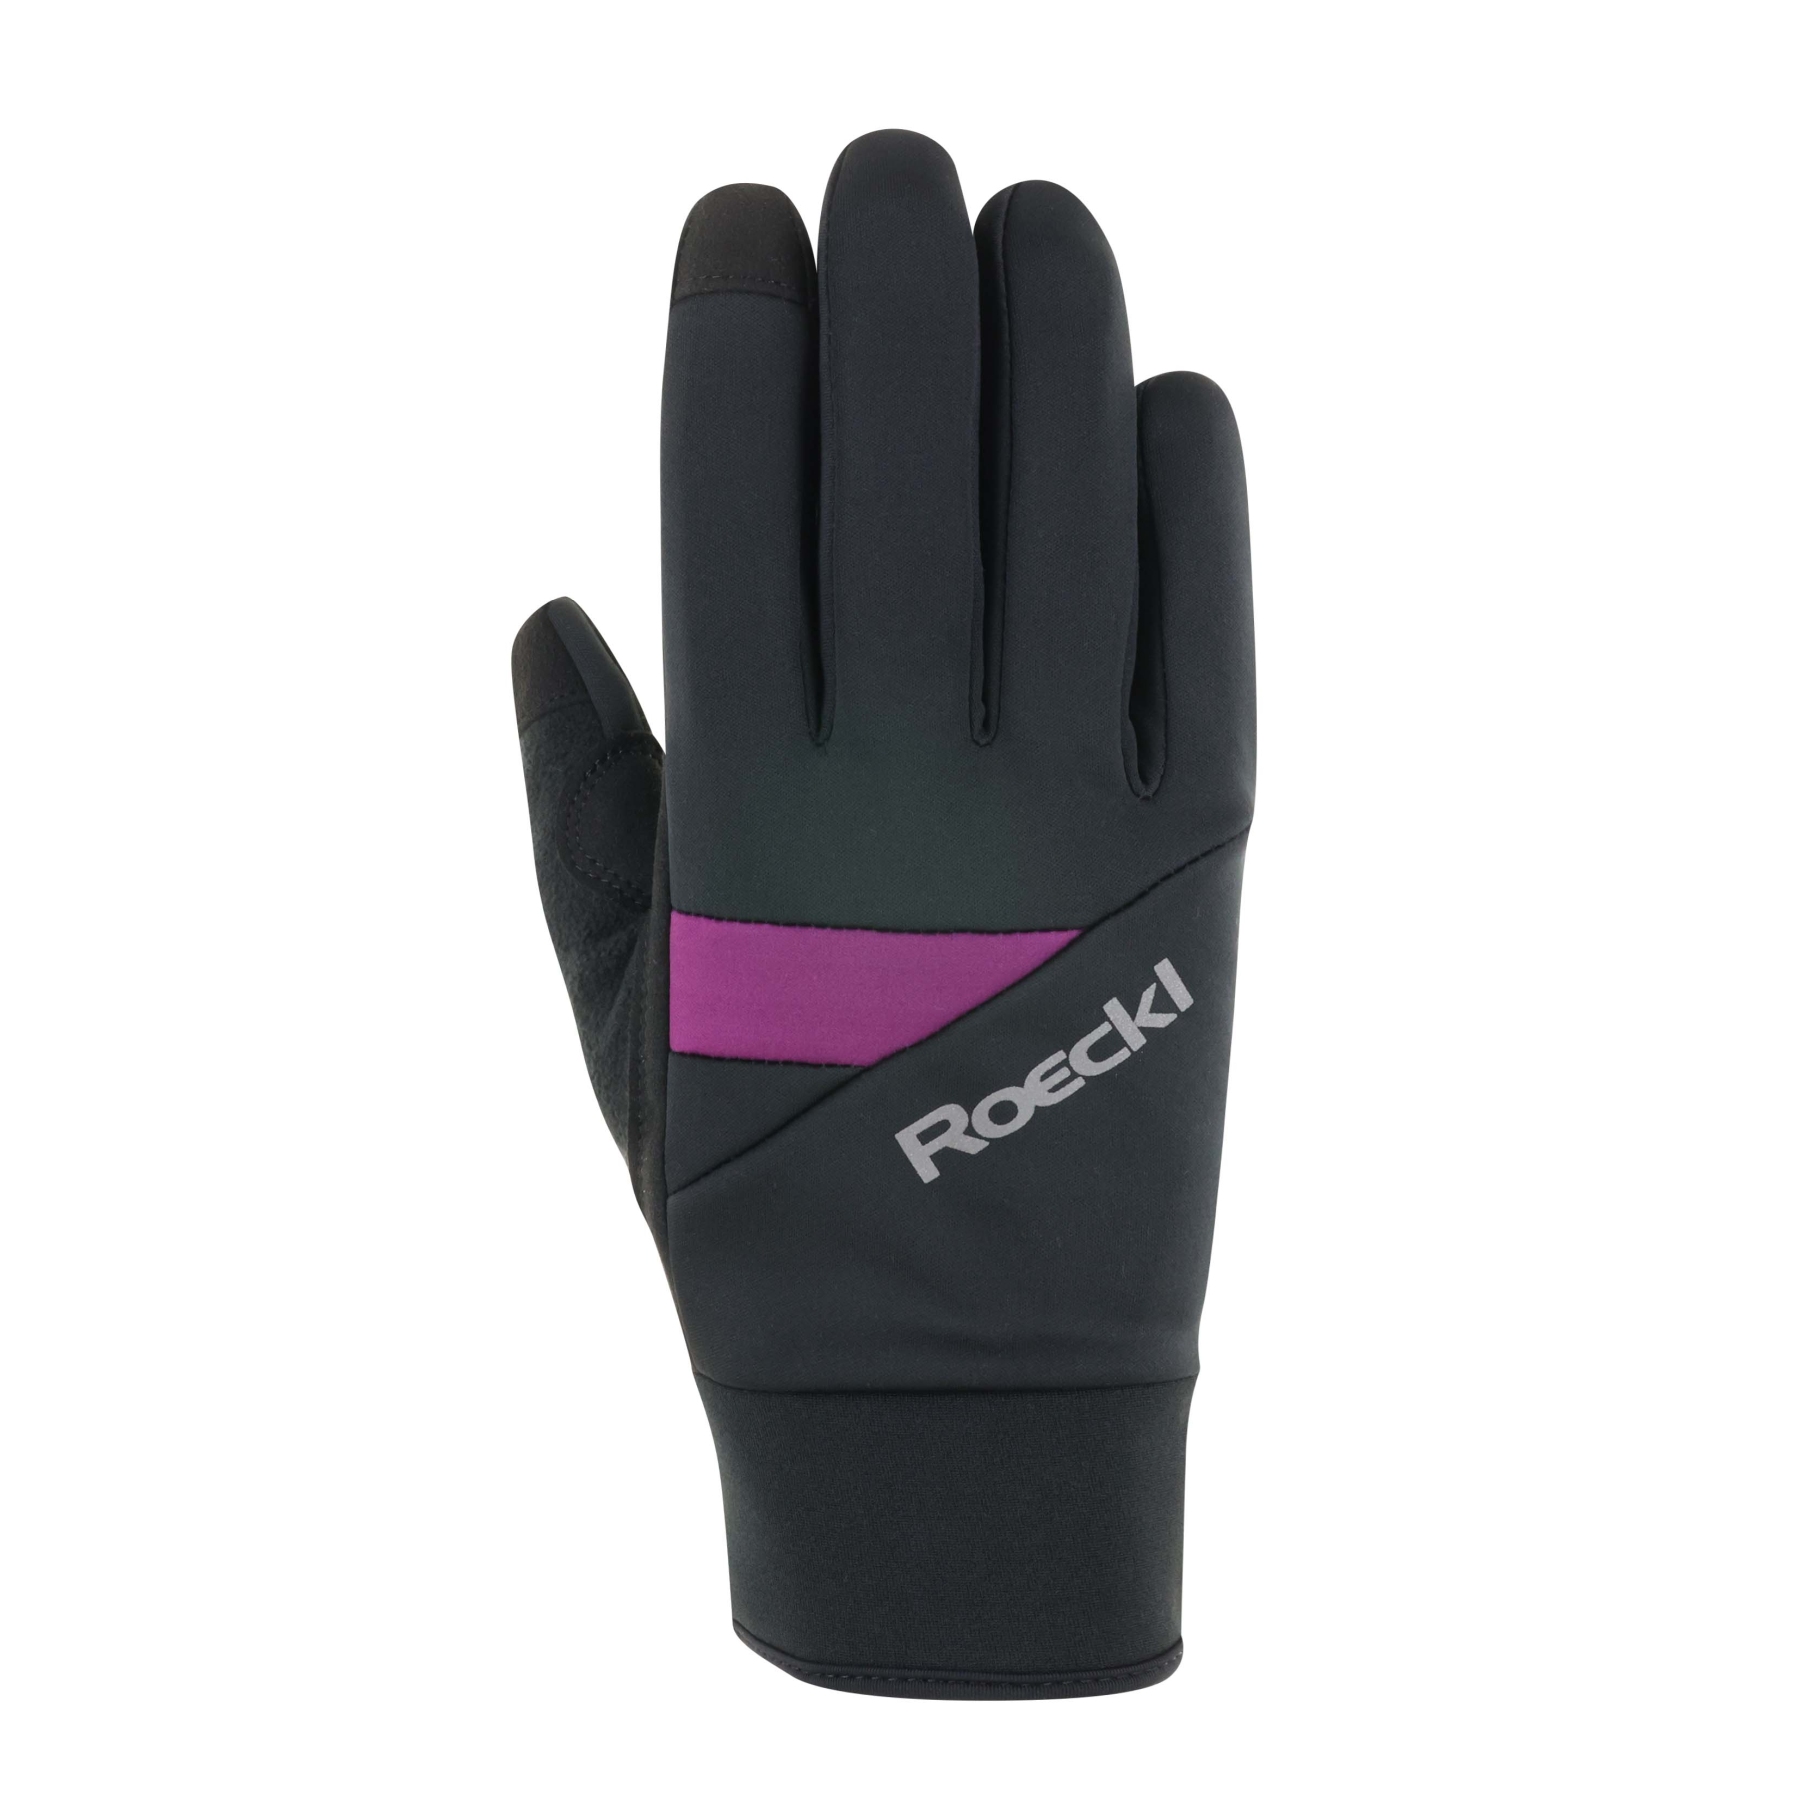 Picture of Roeckl Sports Reichenthal Cycling Gloves - black/purple 9461